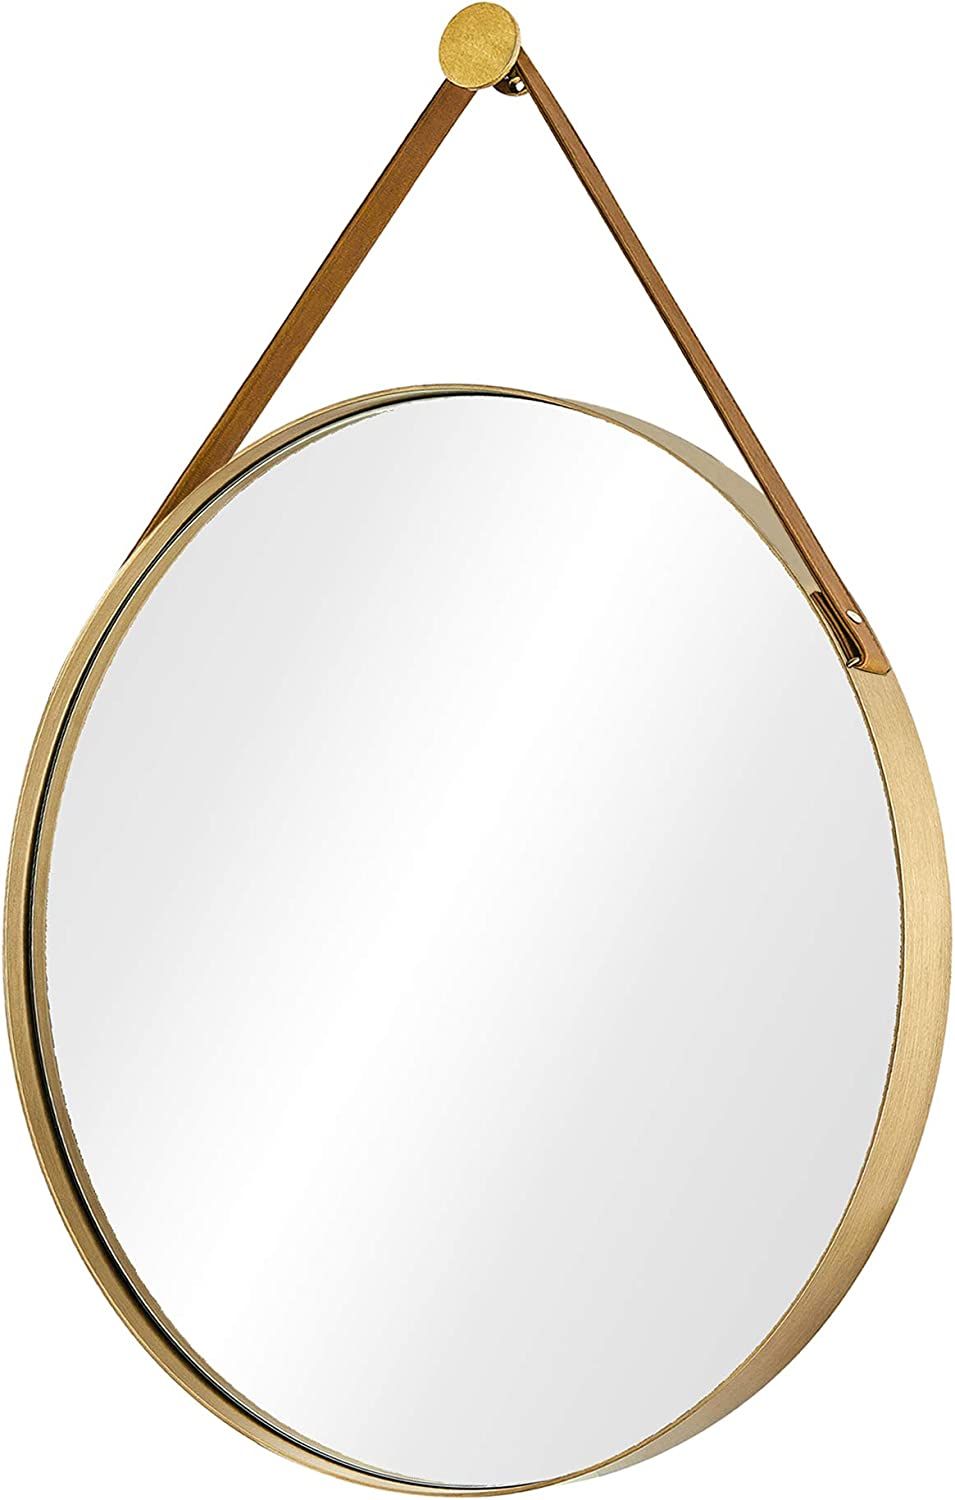 Untrammelife Round Wall Mirror 24 Inch,Gold Round Mirror with Hanging Leather Strap Gold Hardware... | Amazon (US)